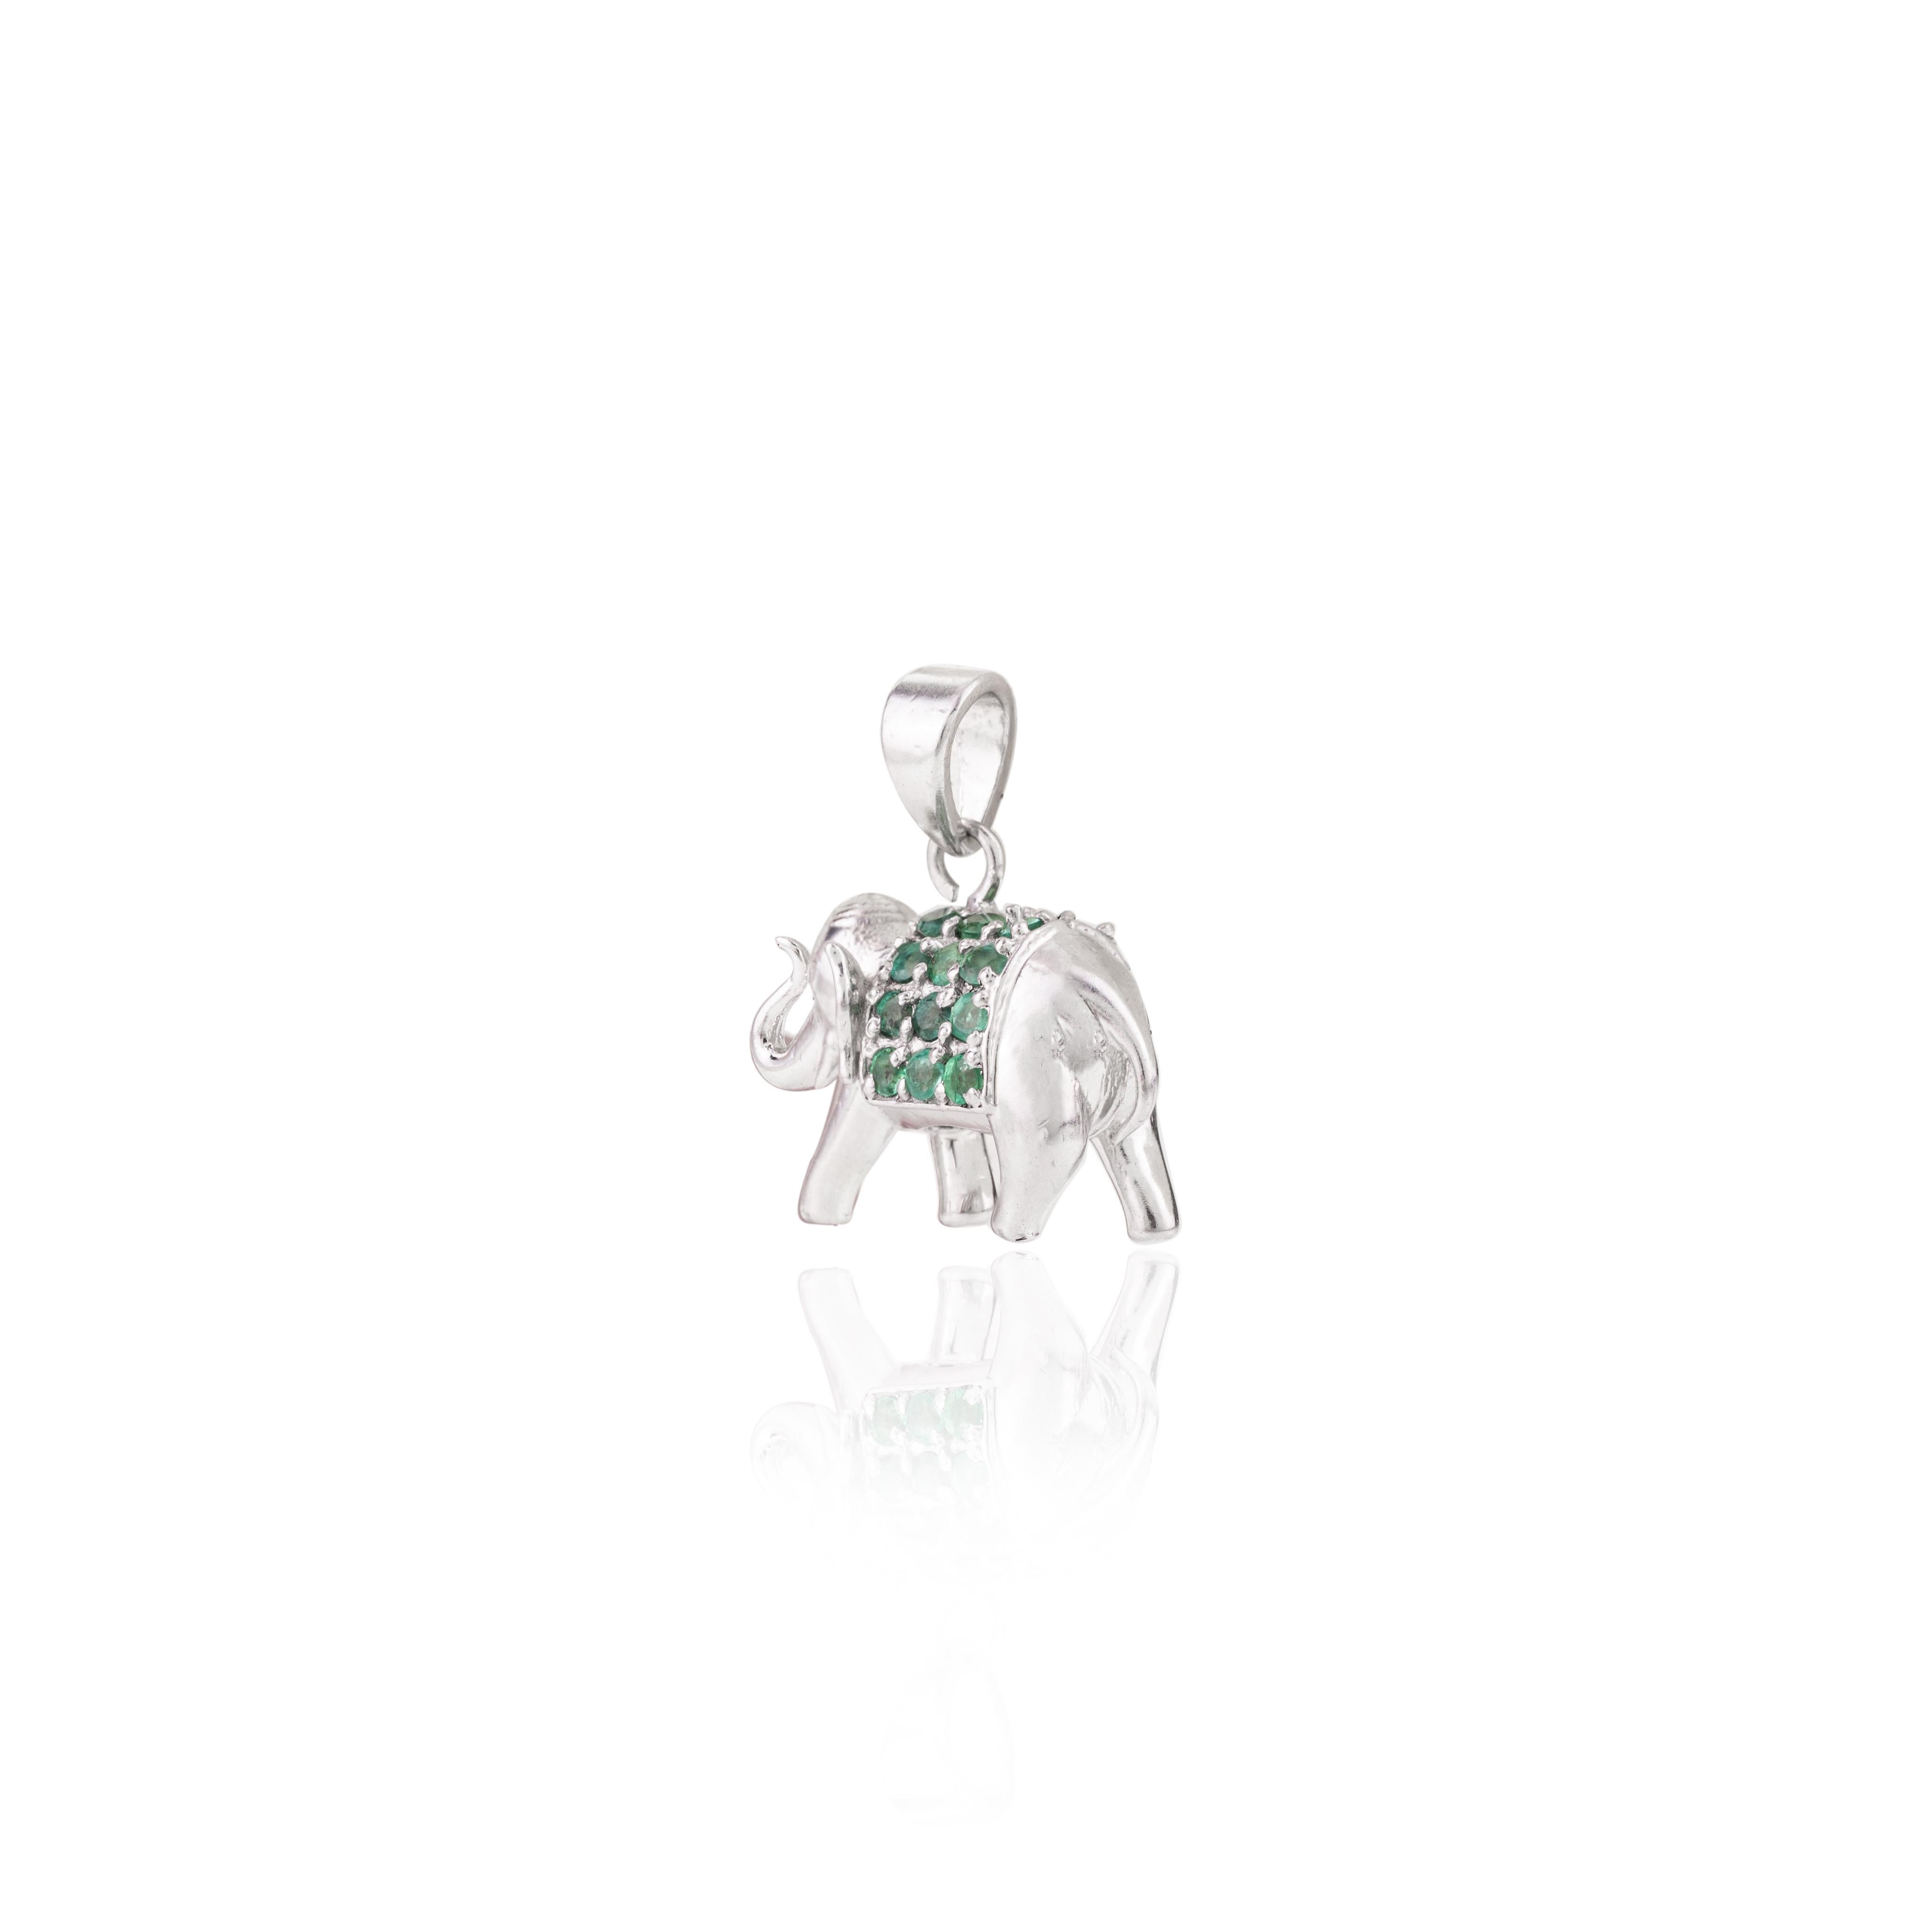 This Green Emerald Birthstone Elephant Pendant is meticulously crafted from the finest materials and adorned with stunning emerald which enhances communication skills and boosts mental clarity. 
This delicate to statement pendants, suits every style